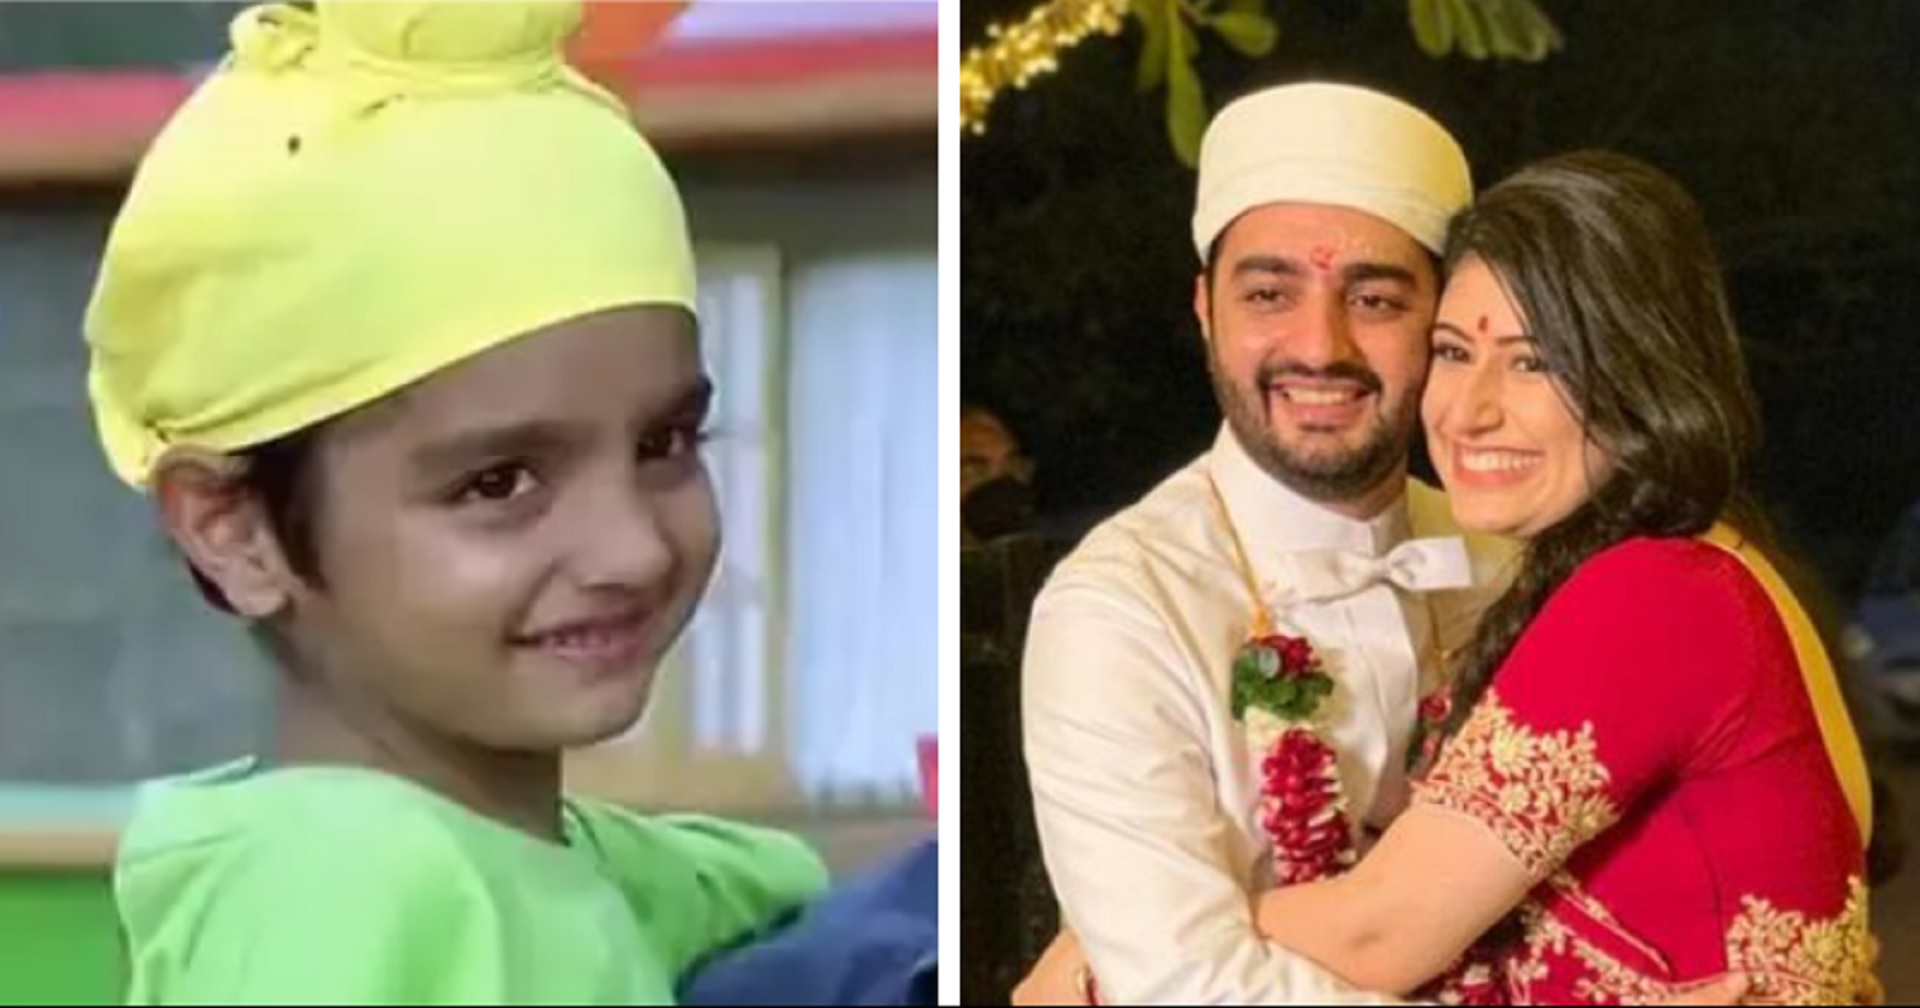 Parzaan Dastur – The Adorable Kid From ‘Kuch Kuch Hota Hai’ Is Now Engaged. How Time Flies…